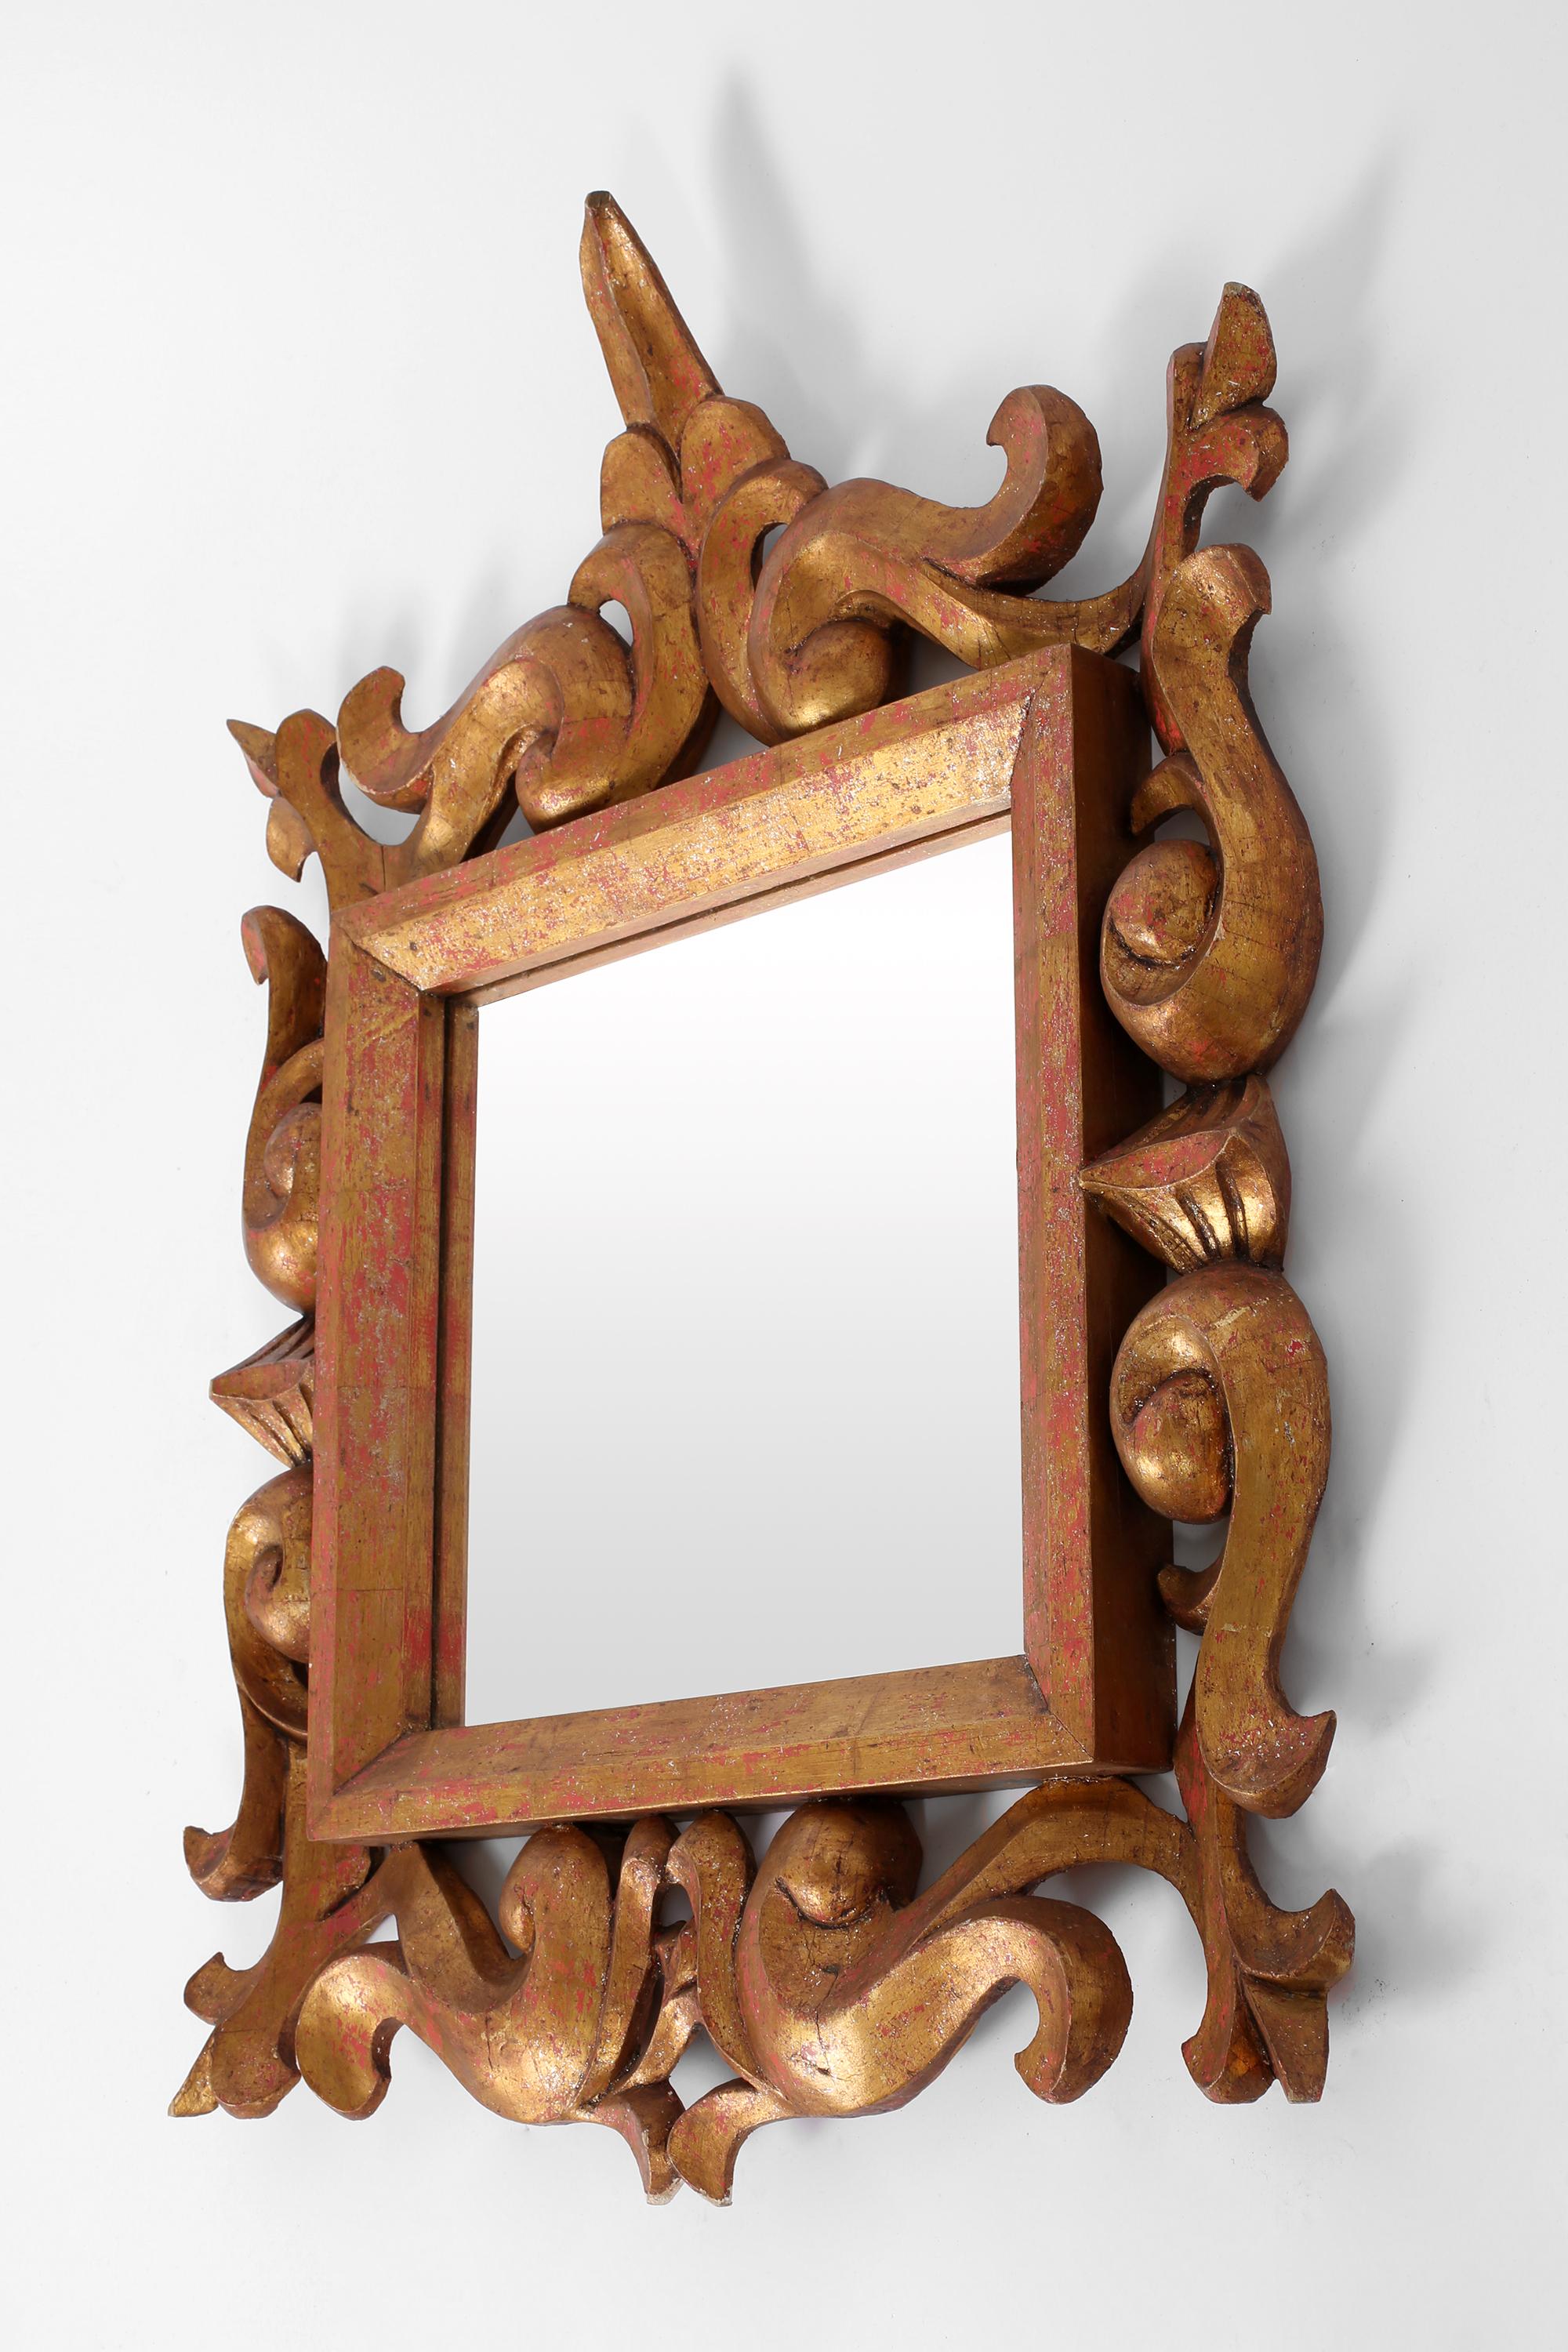 A statement hand-carved and gilt wood Florentine style mirror. French, c. 1940s.